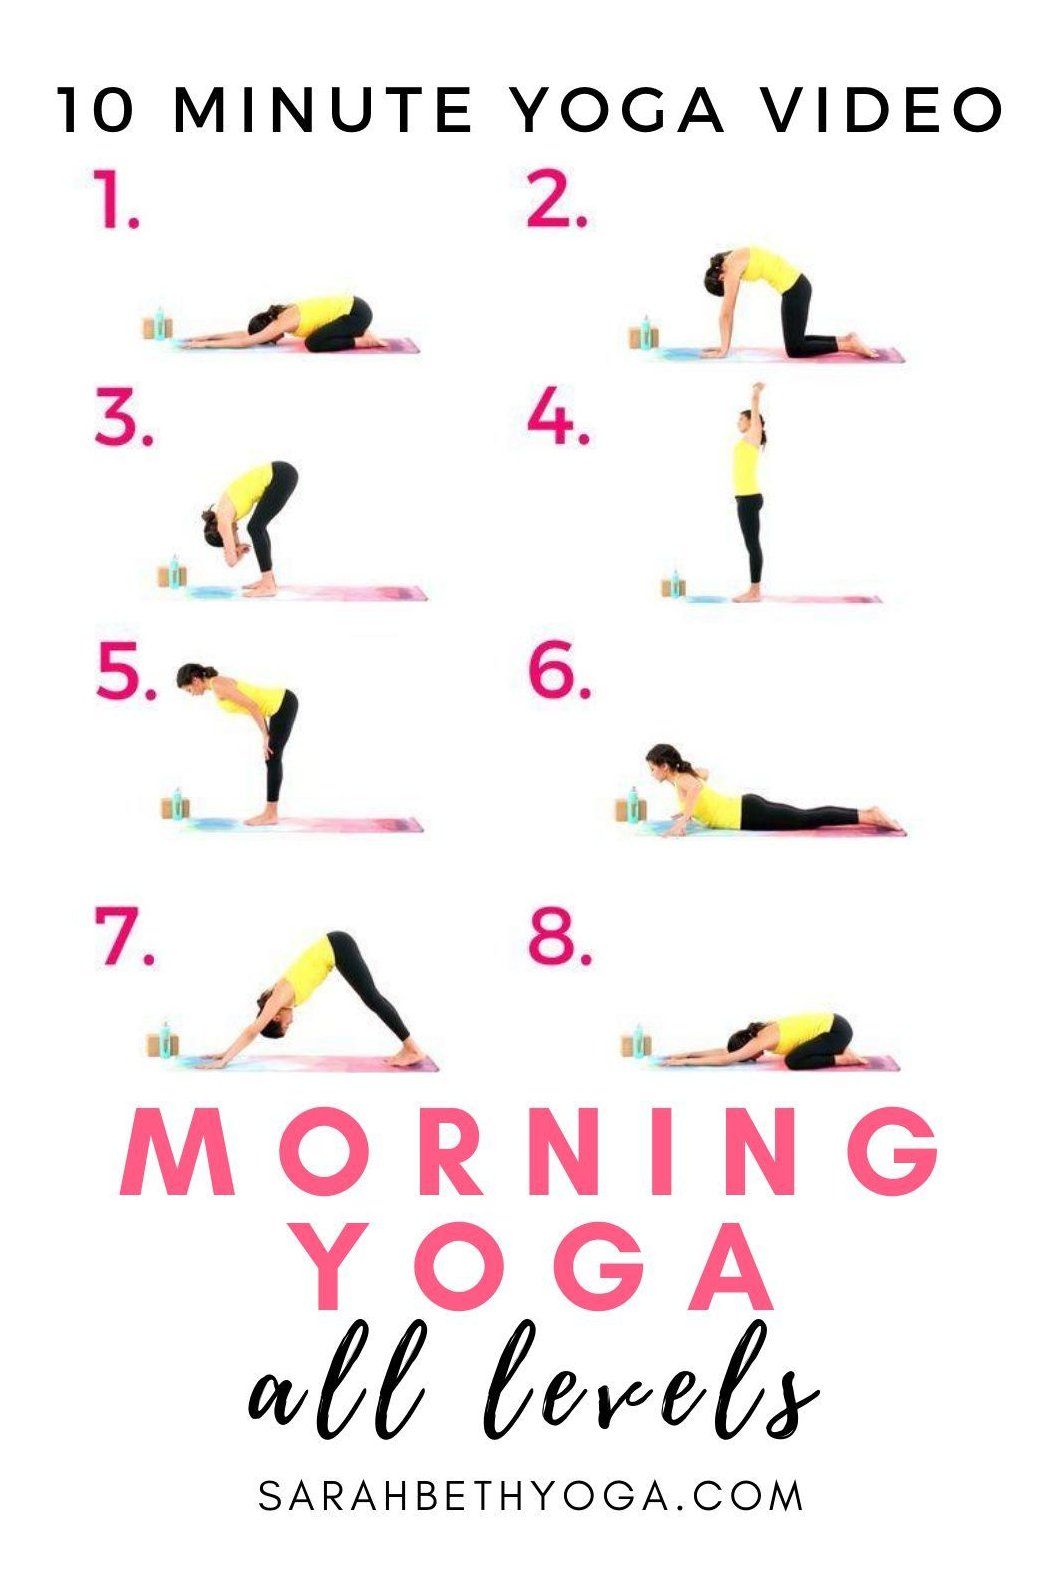 Yoga Poses For Beginners
